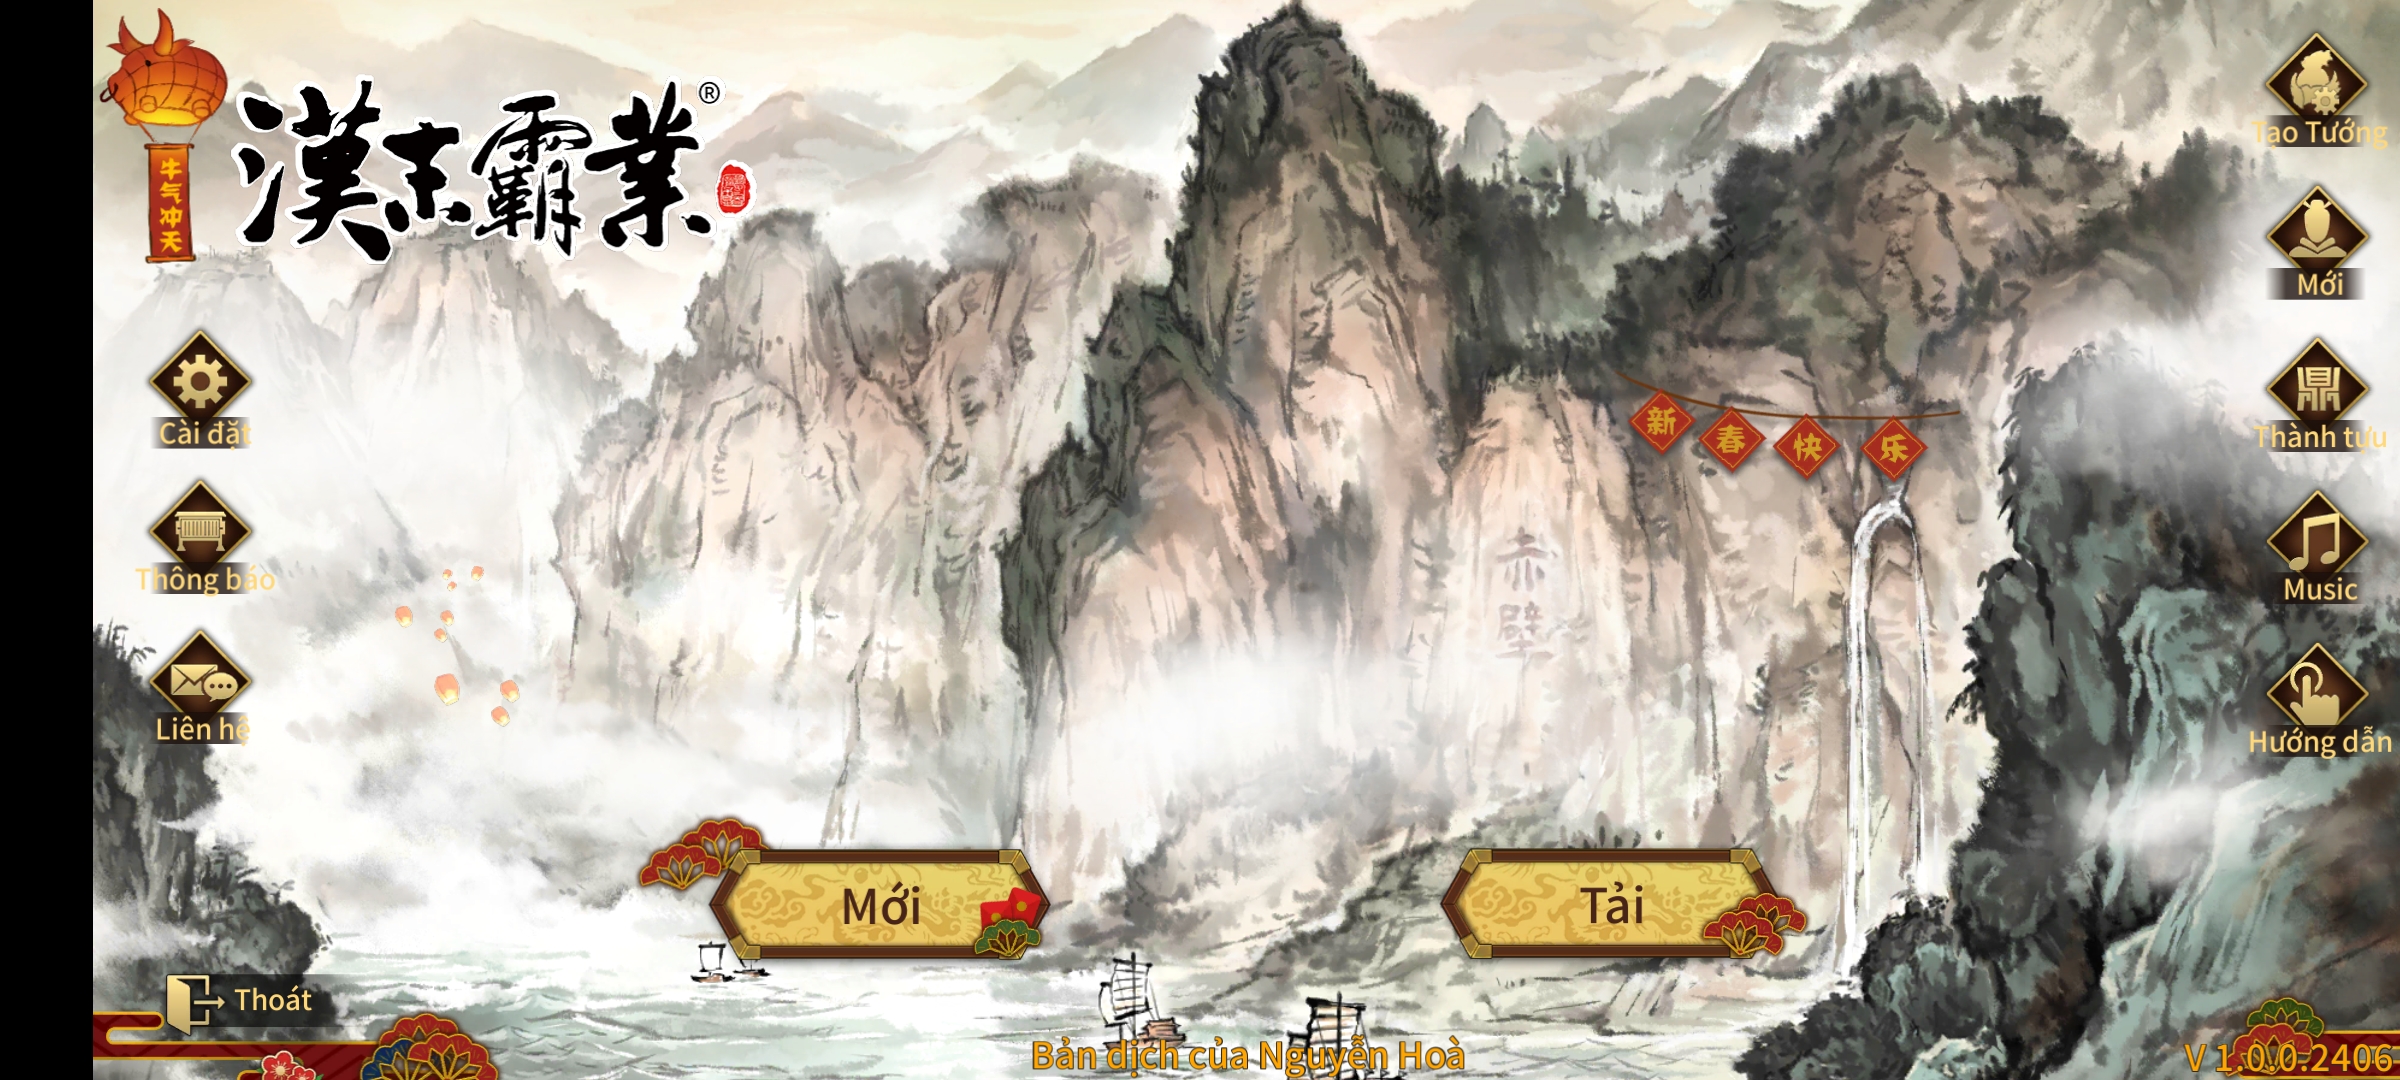 [Game Android] ThreeKingdoms The Last Warlord Tiếng Việt